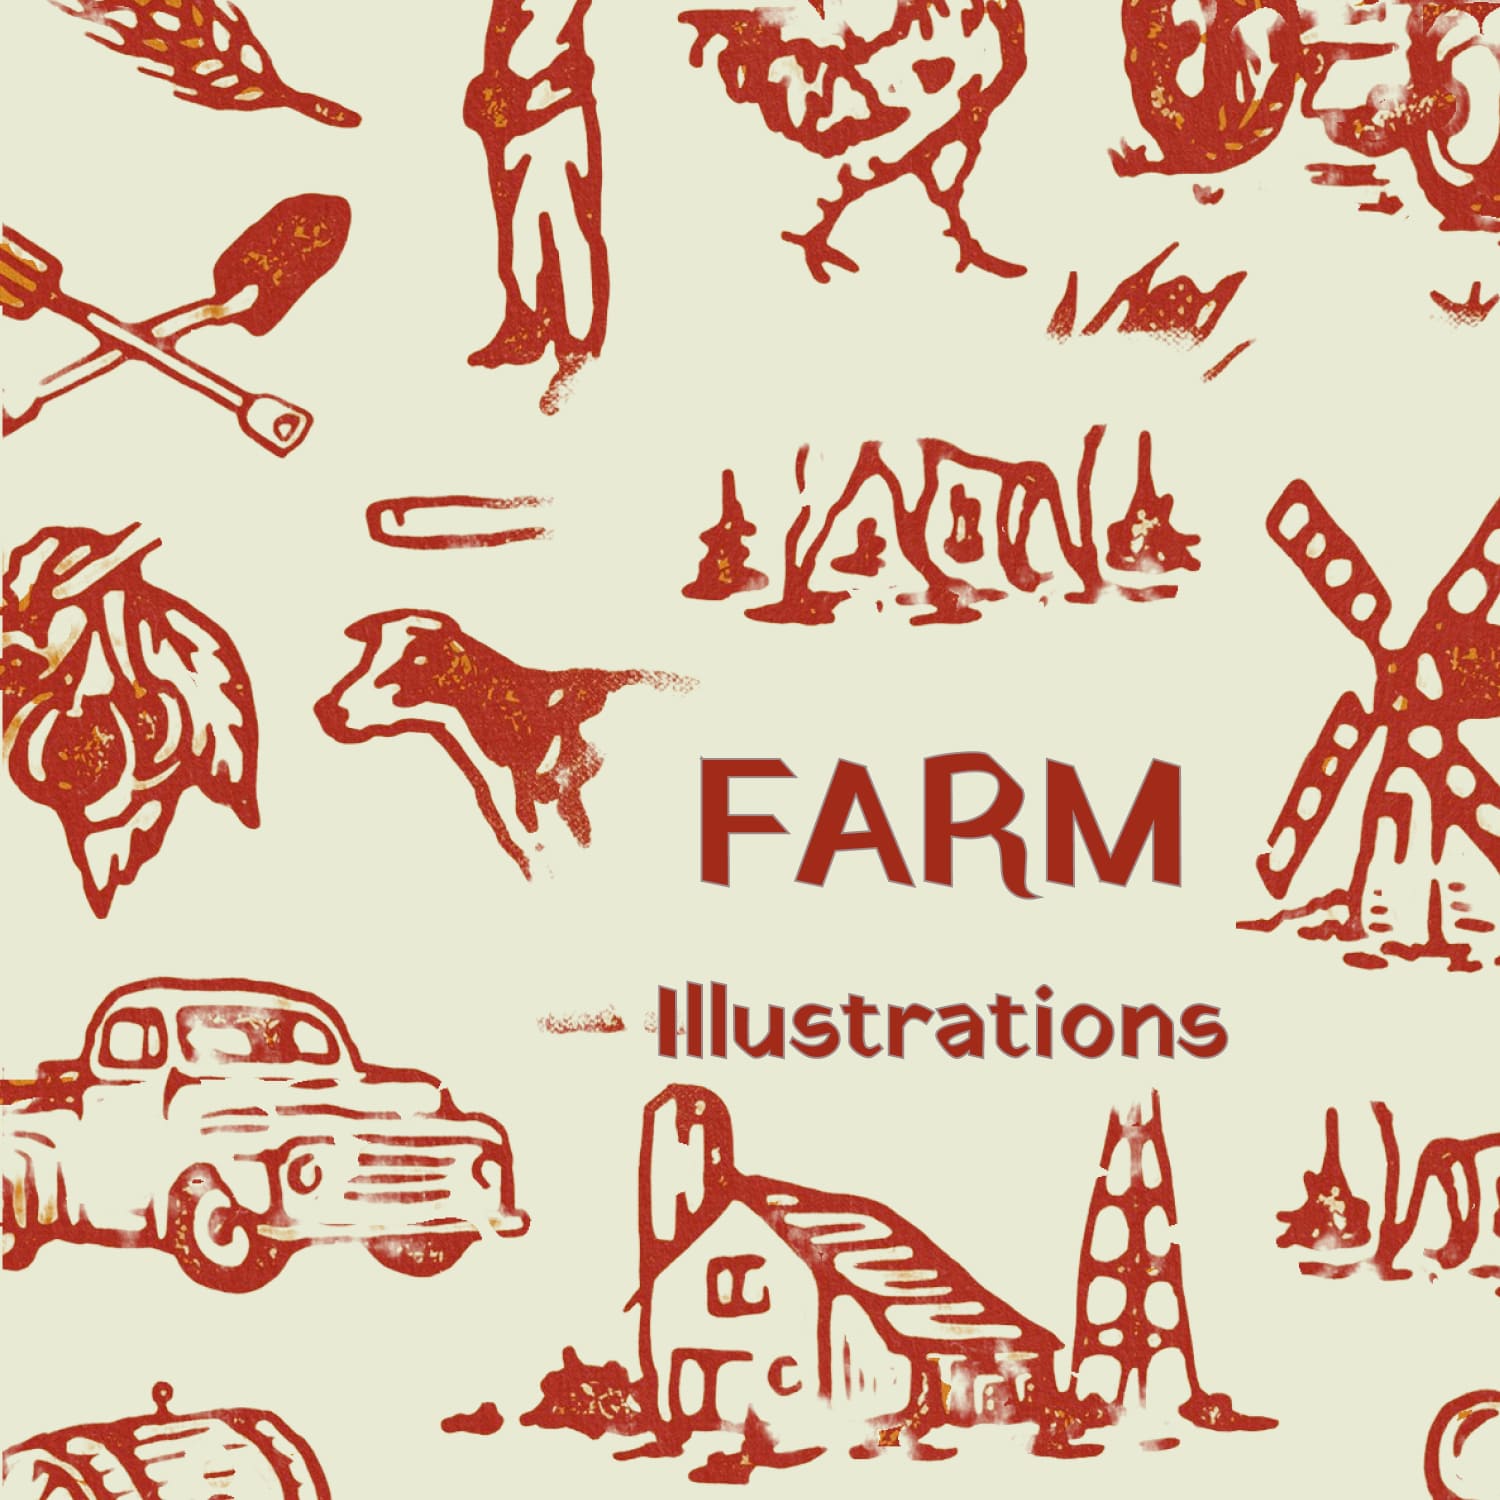 Farm Illustrations inspired from farm, barn, organic, and nature.